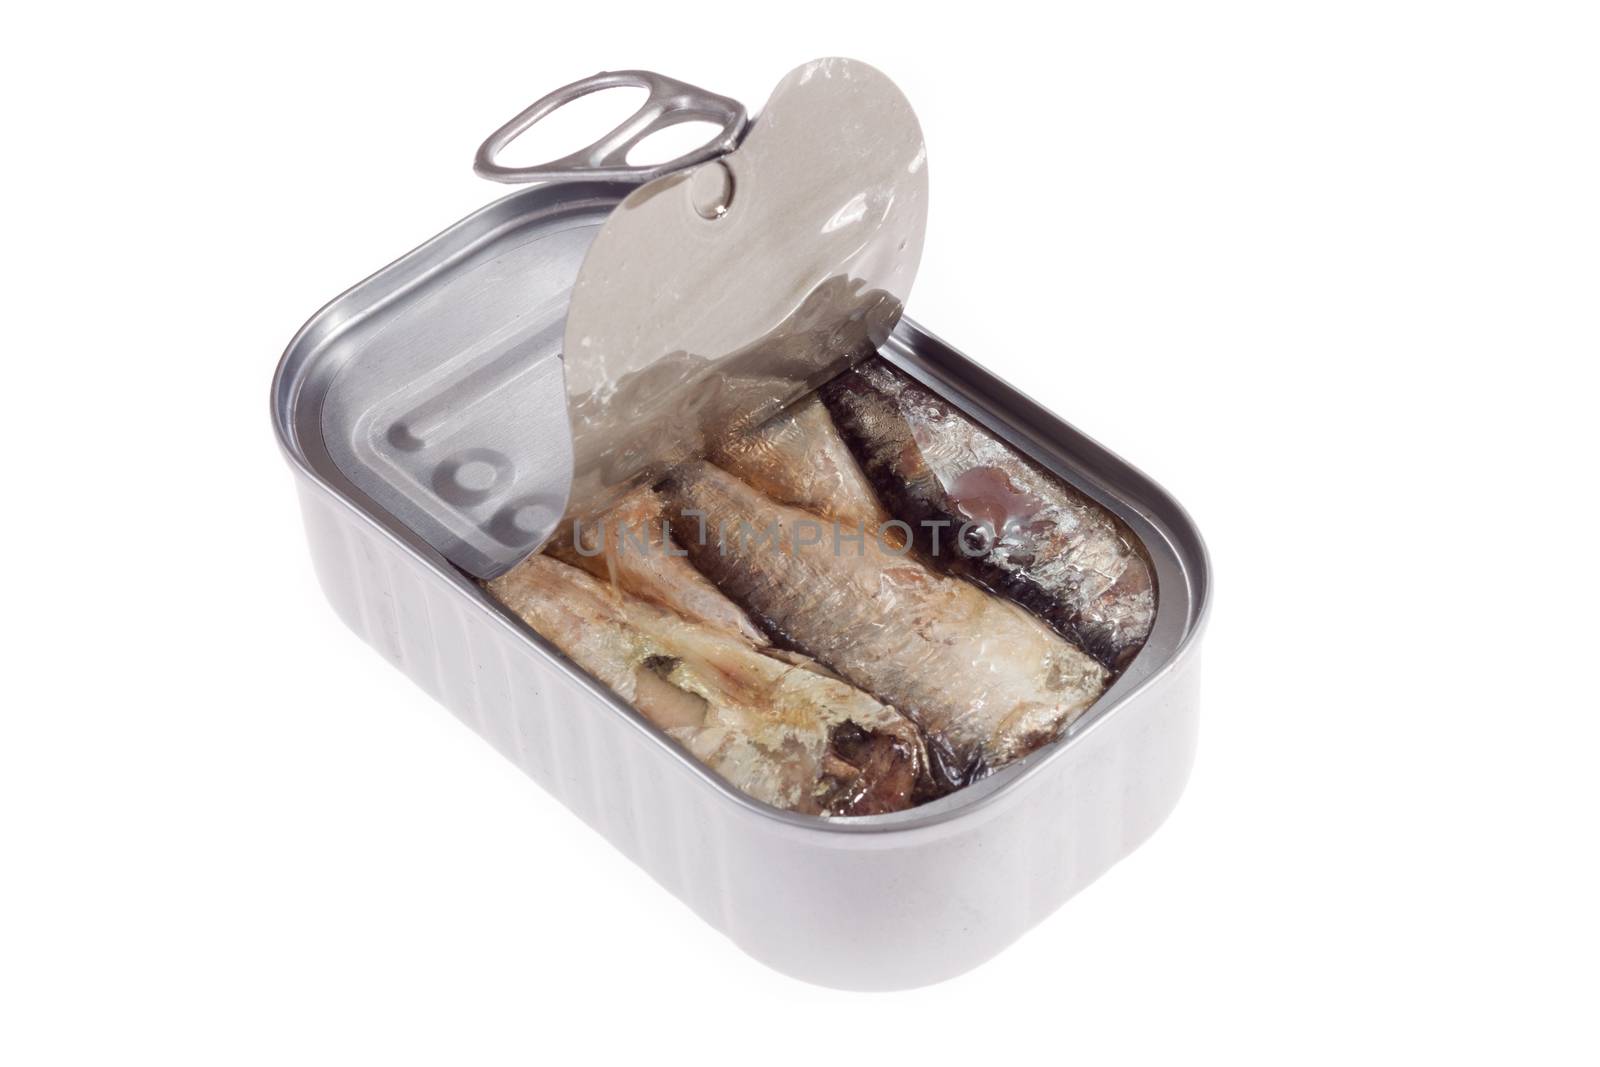 Can of sardines by aguirre_mar